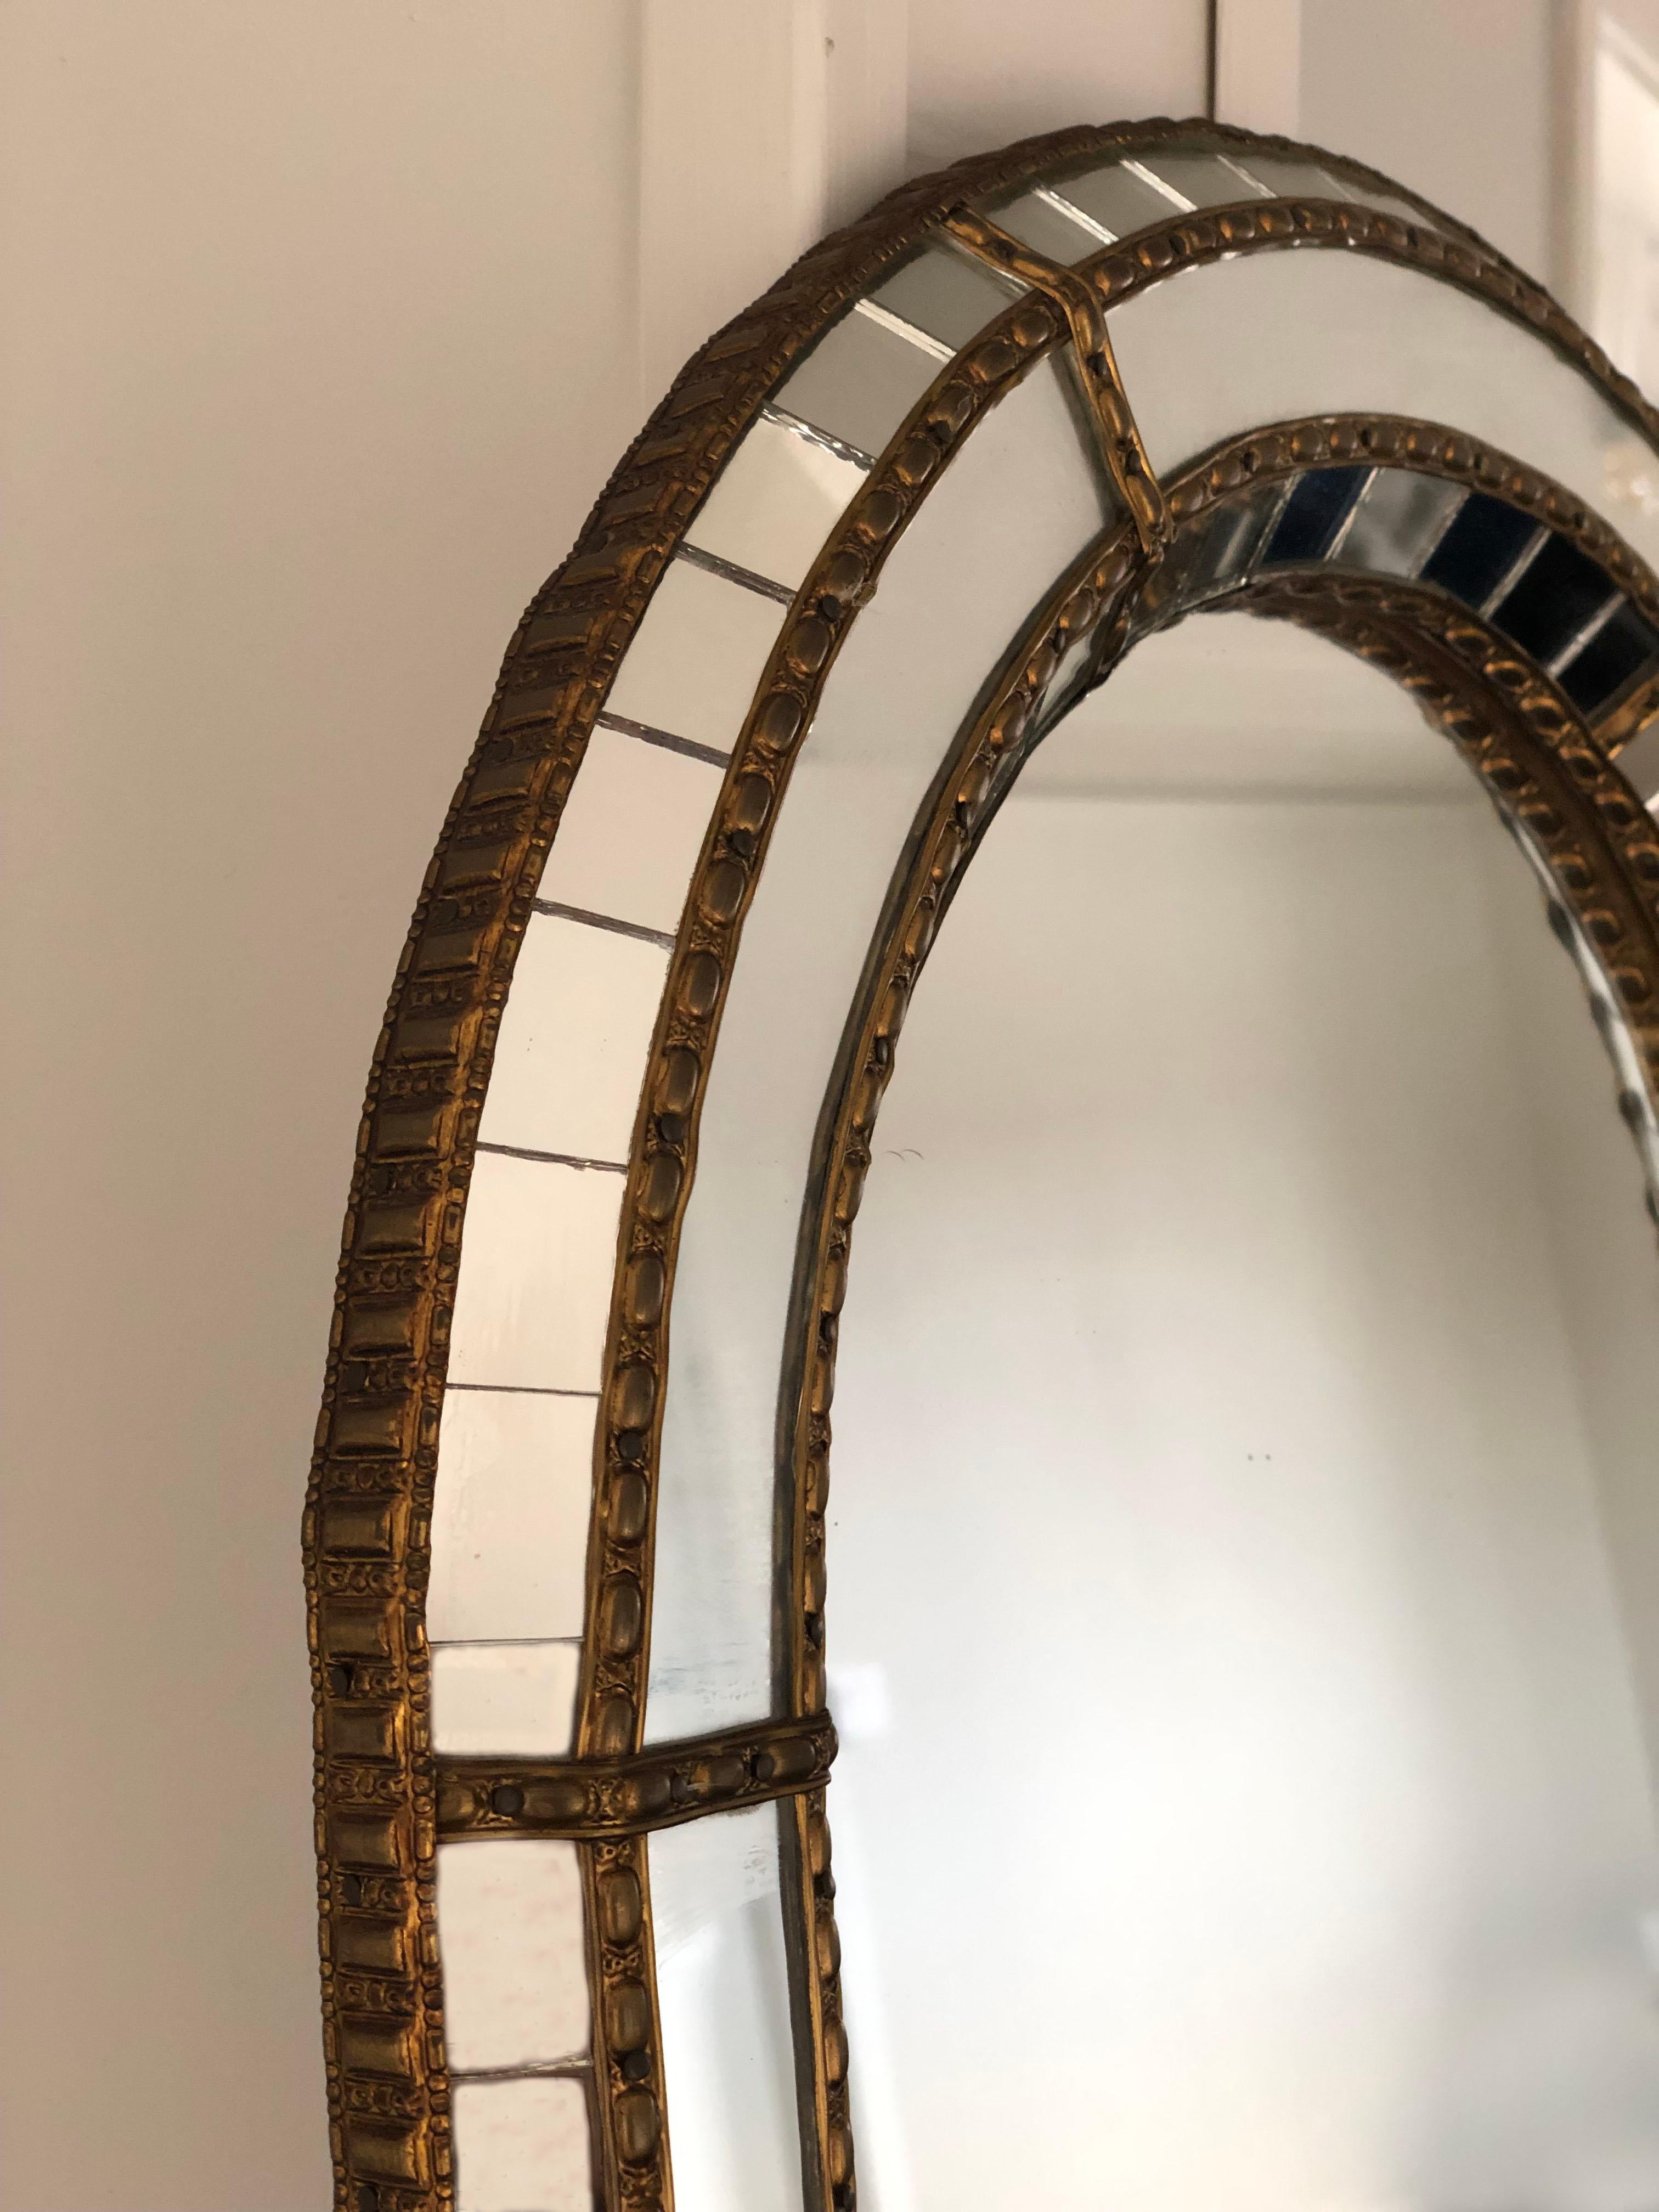 A beautiful Spanish mirrors with a Venetian glass frame with a brass golden strip. The frame is made with small crystals both on the outside and inside, and larger ones in the center line. The brass strip holds the mirror together.

Handmade mirror